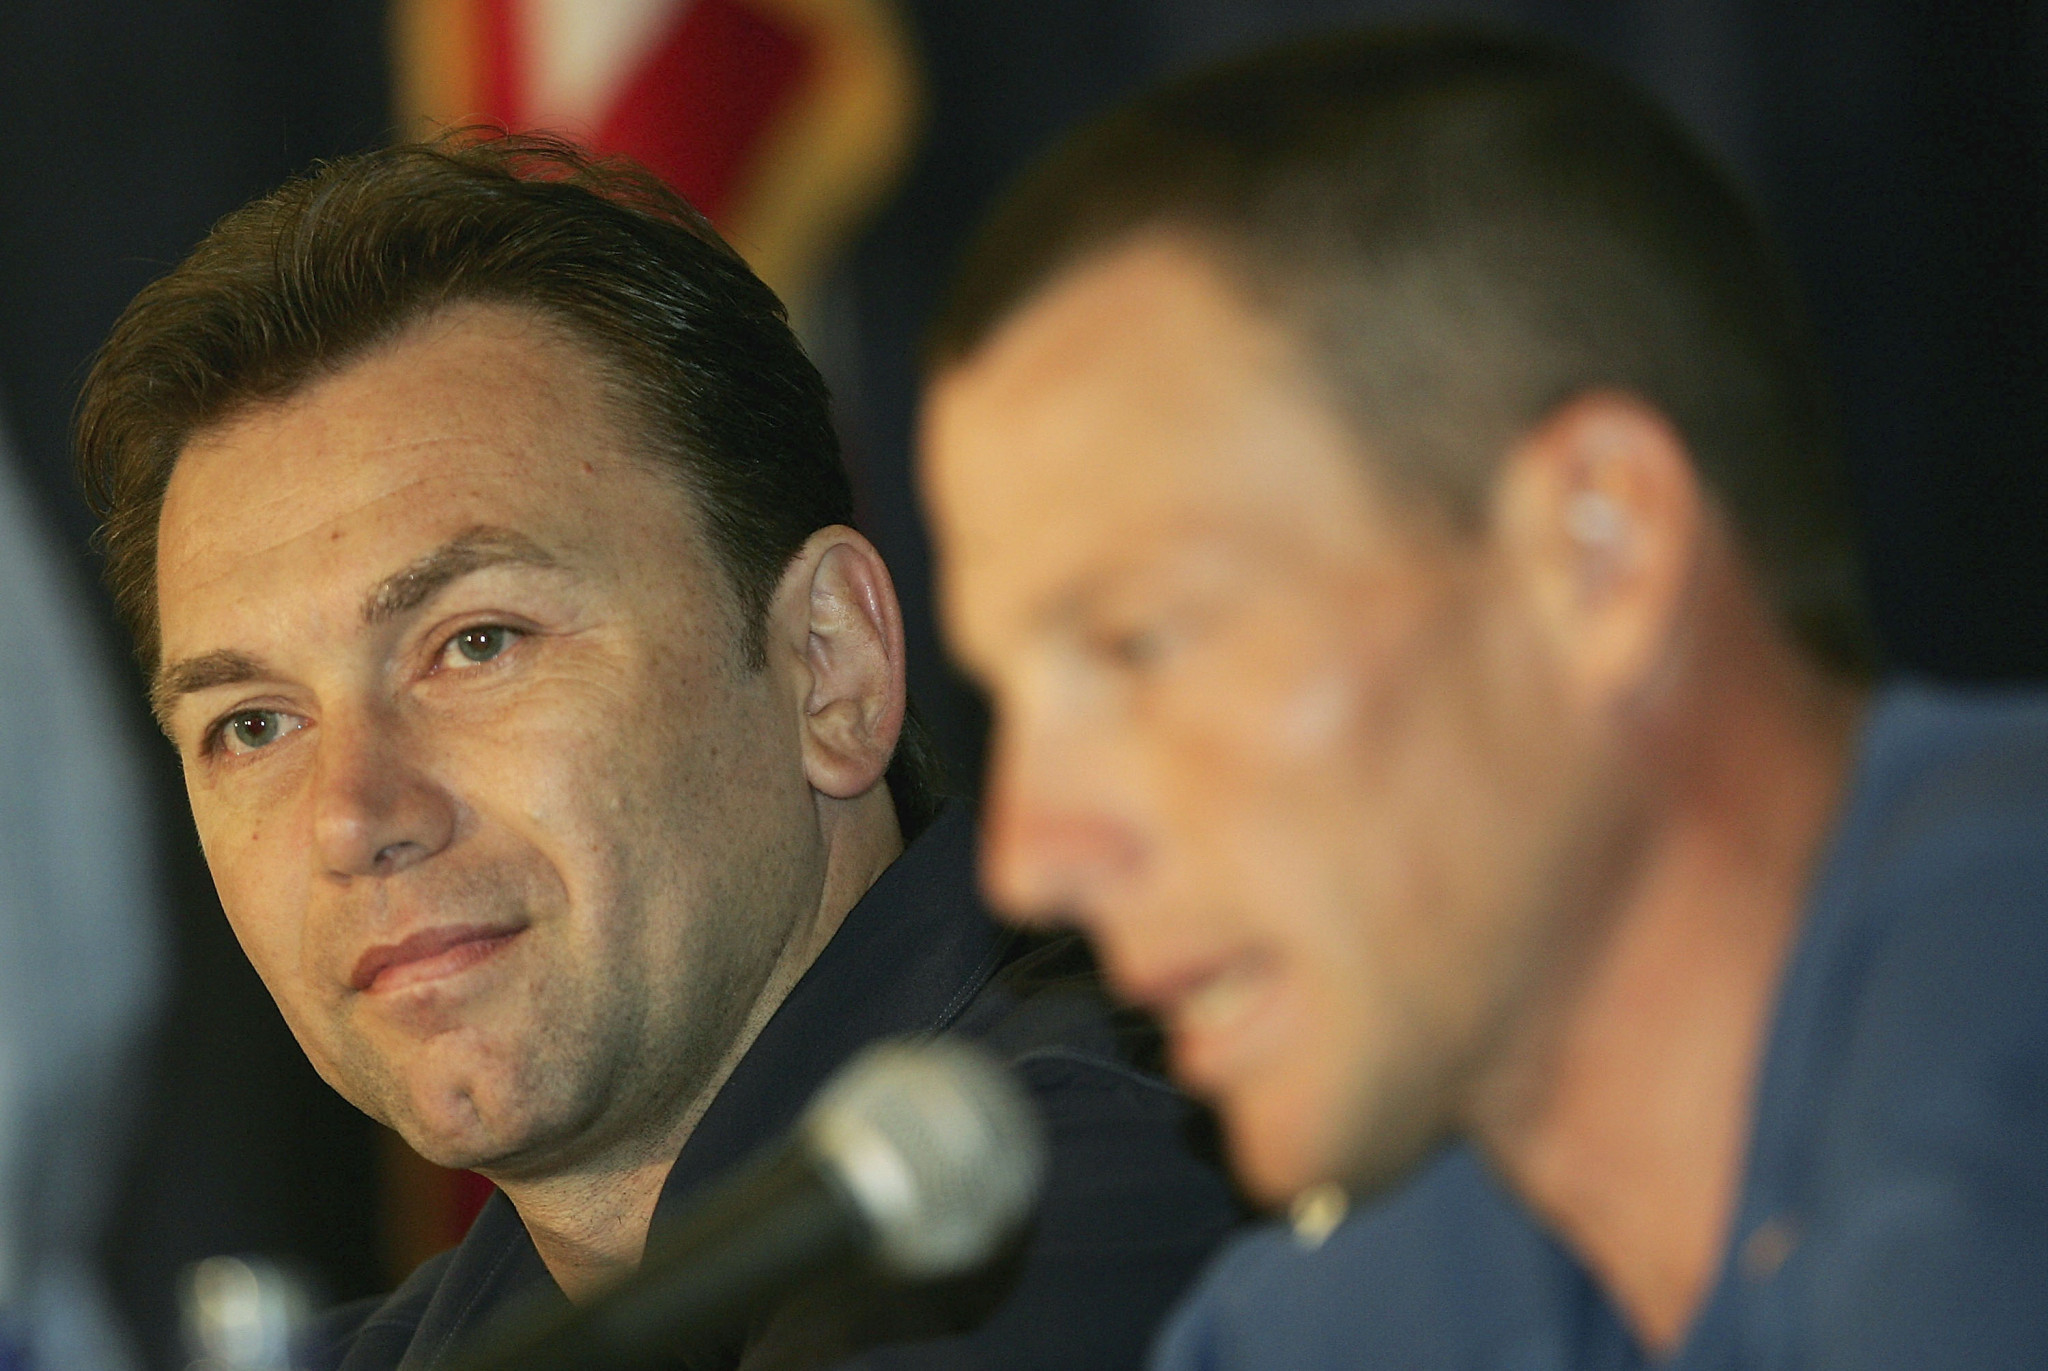 Johan Bruyneel had been sanctioned for his involvement in the doping conspiracy at US Postal ©Getty Images